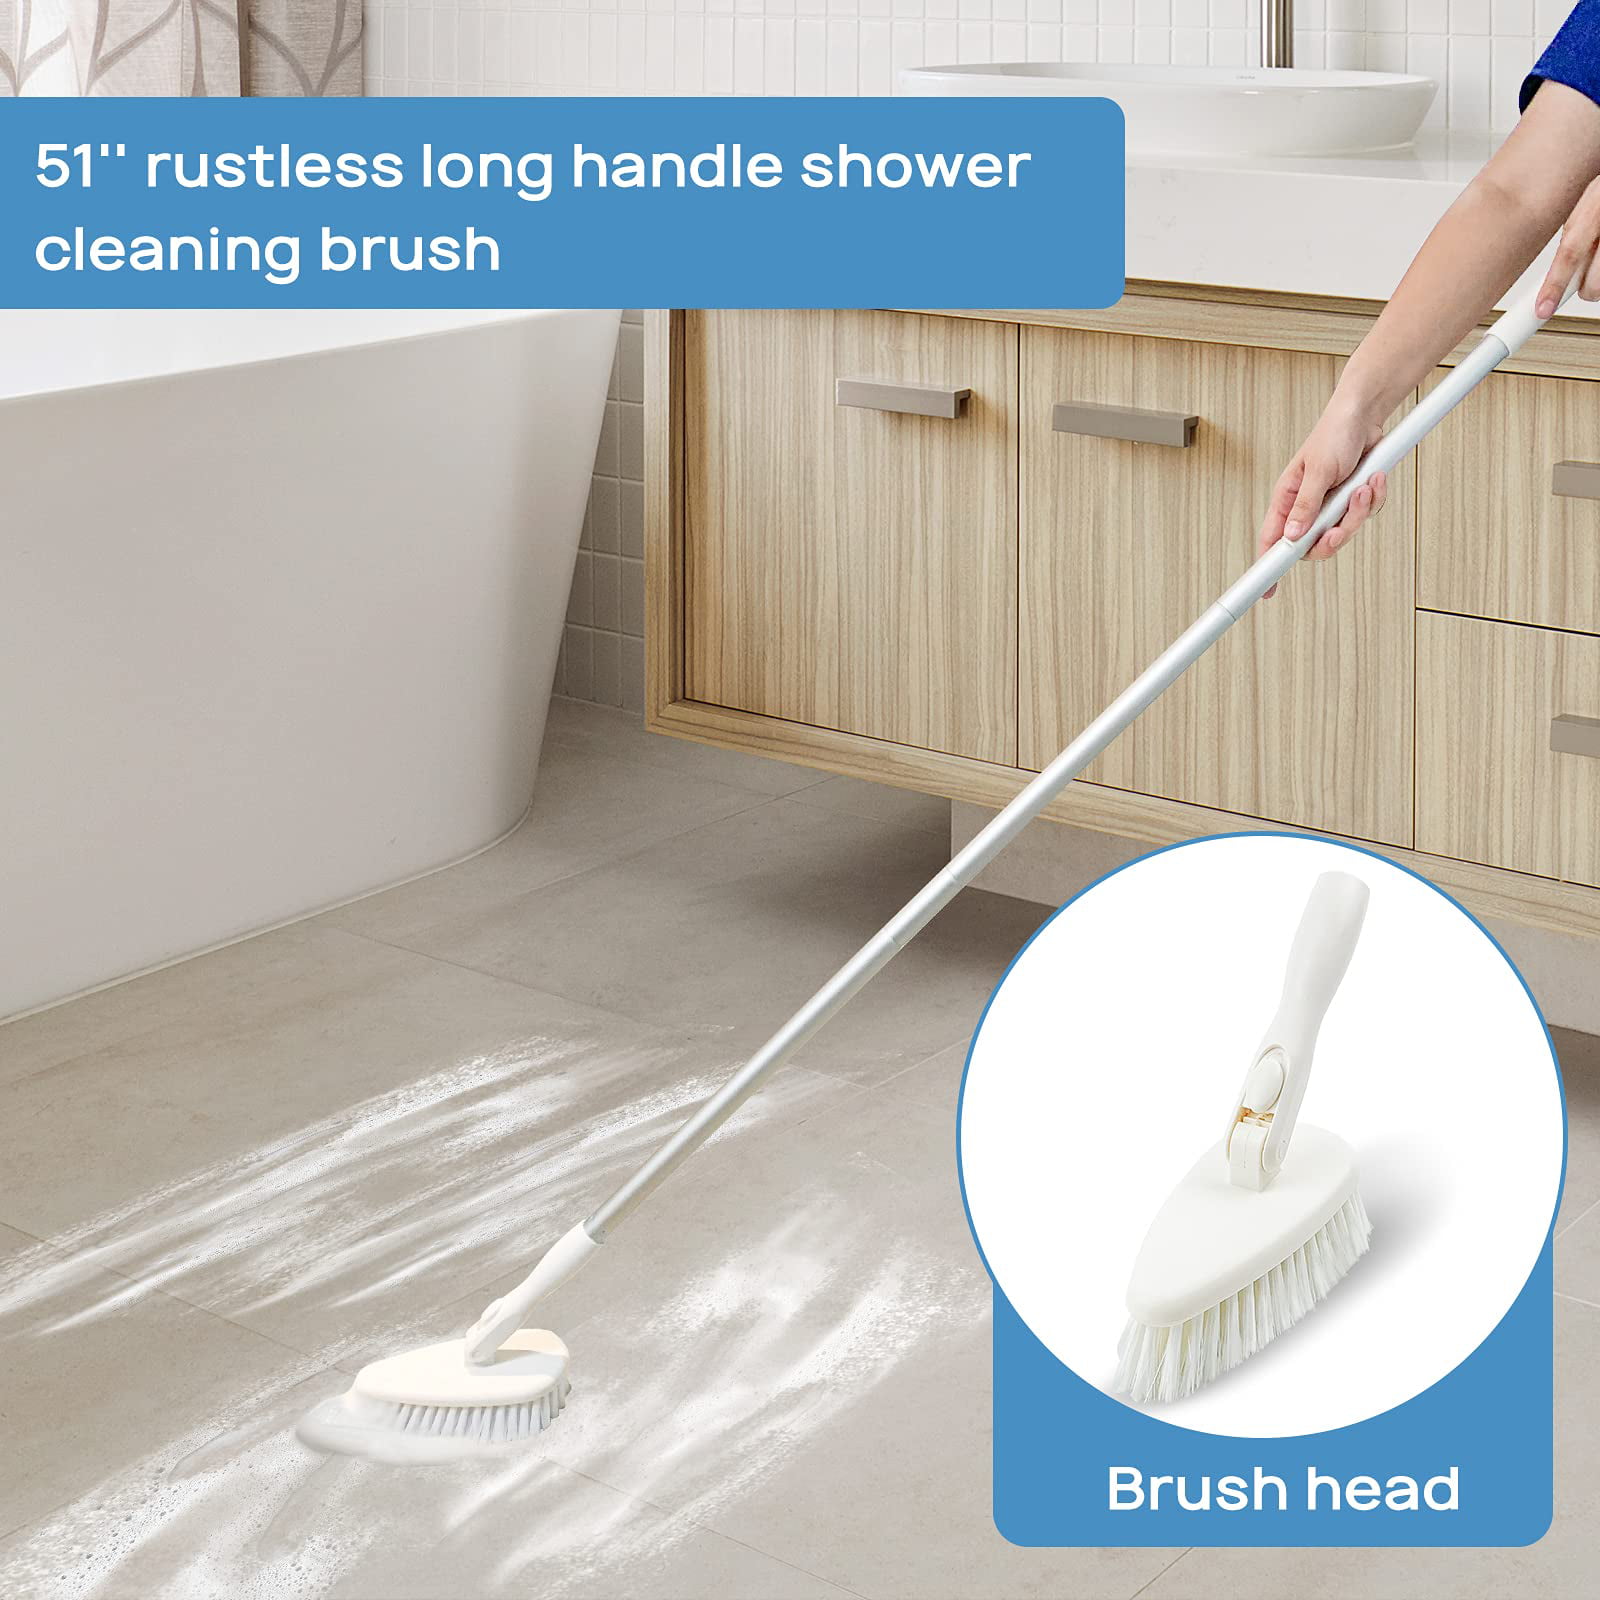  Tub and Tile Scrubber, 3 in 1 Shower Cleaning Brush 51.5” Long  Handle Grout Brush Stiff Bristles Scrub Brush for Cleaning Bathtub Shower  Bathroom Kitchen Toilet Wall Glass Tub Tile Sink